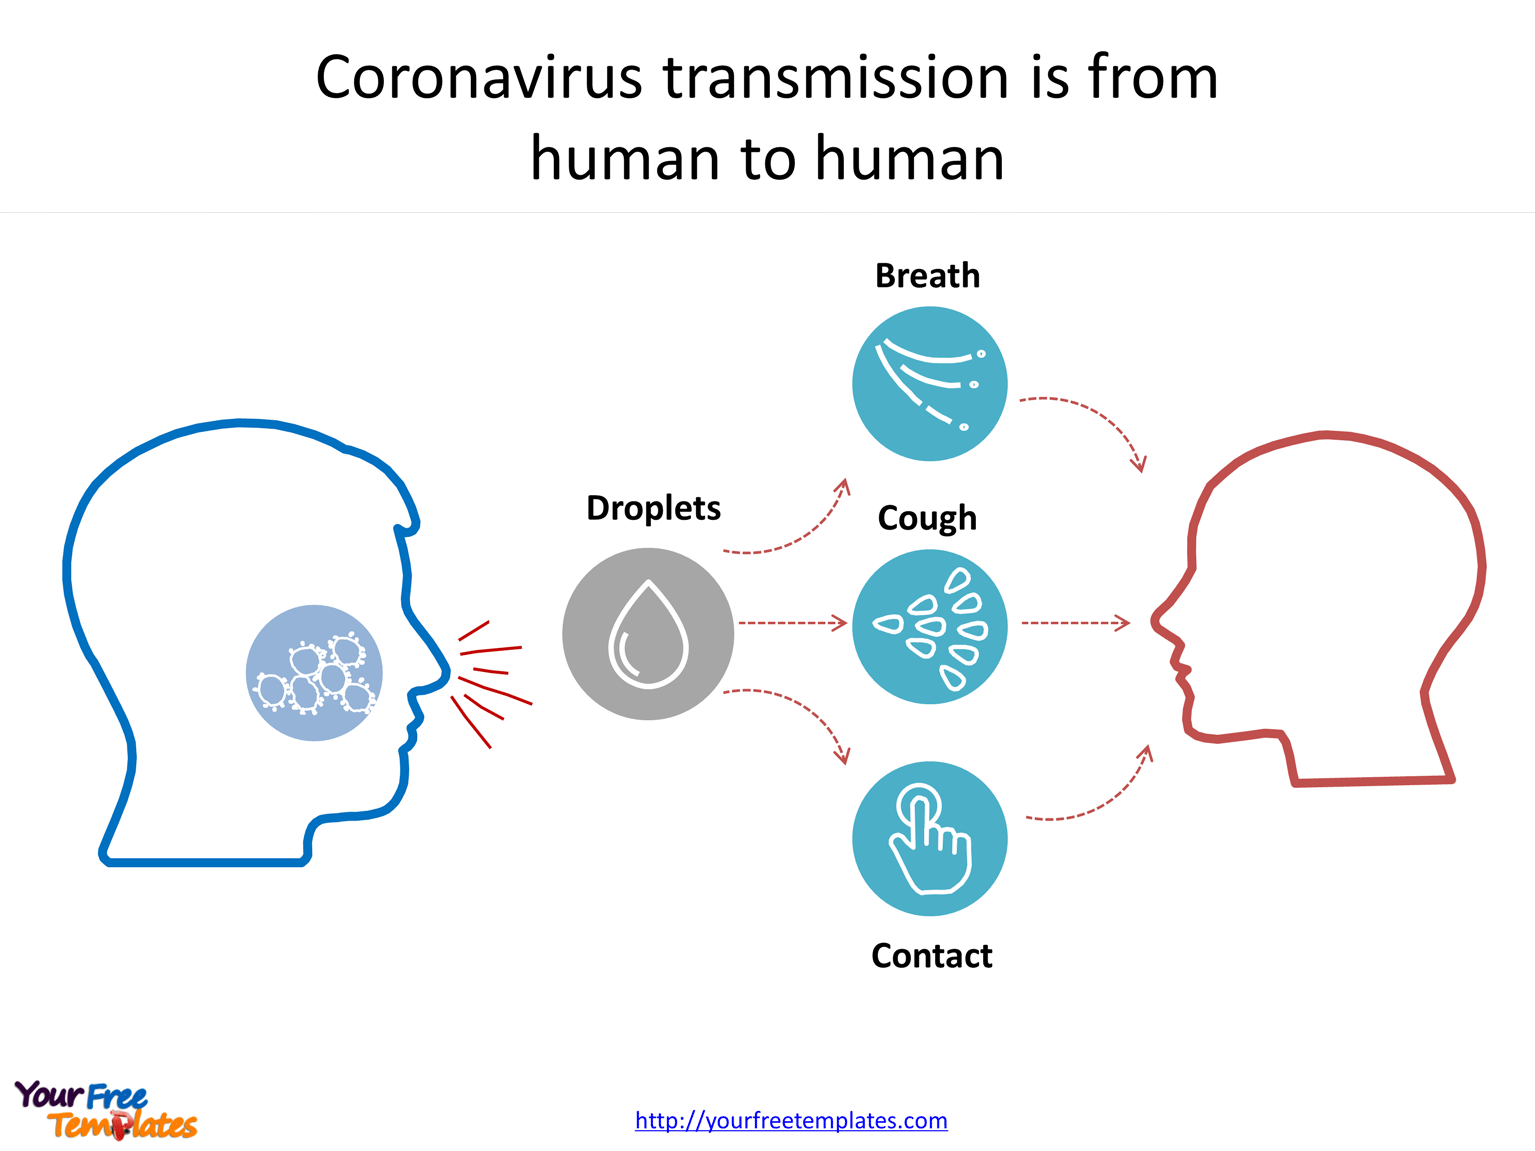 Coronavirus transmission infographic is from human to human by droplets